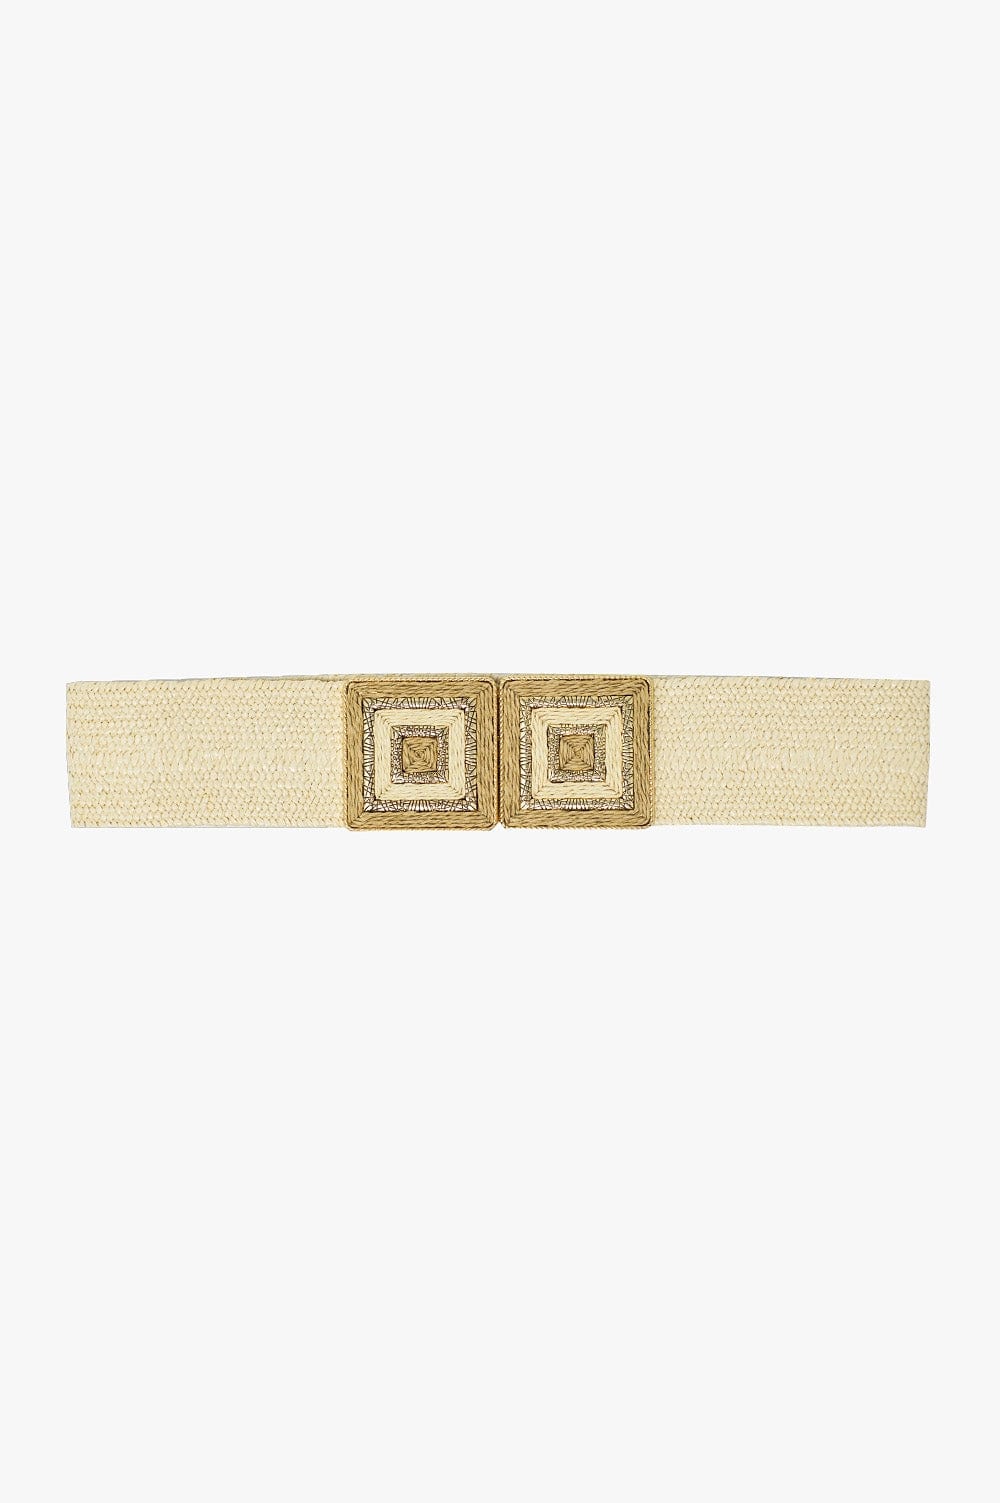 Q2 Women's Belt One Size / Beige Thick Beige Woven Belt With Square Buckle With Gold Details